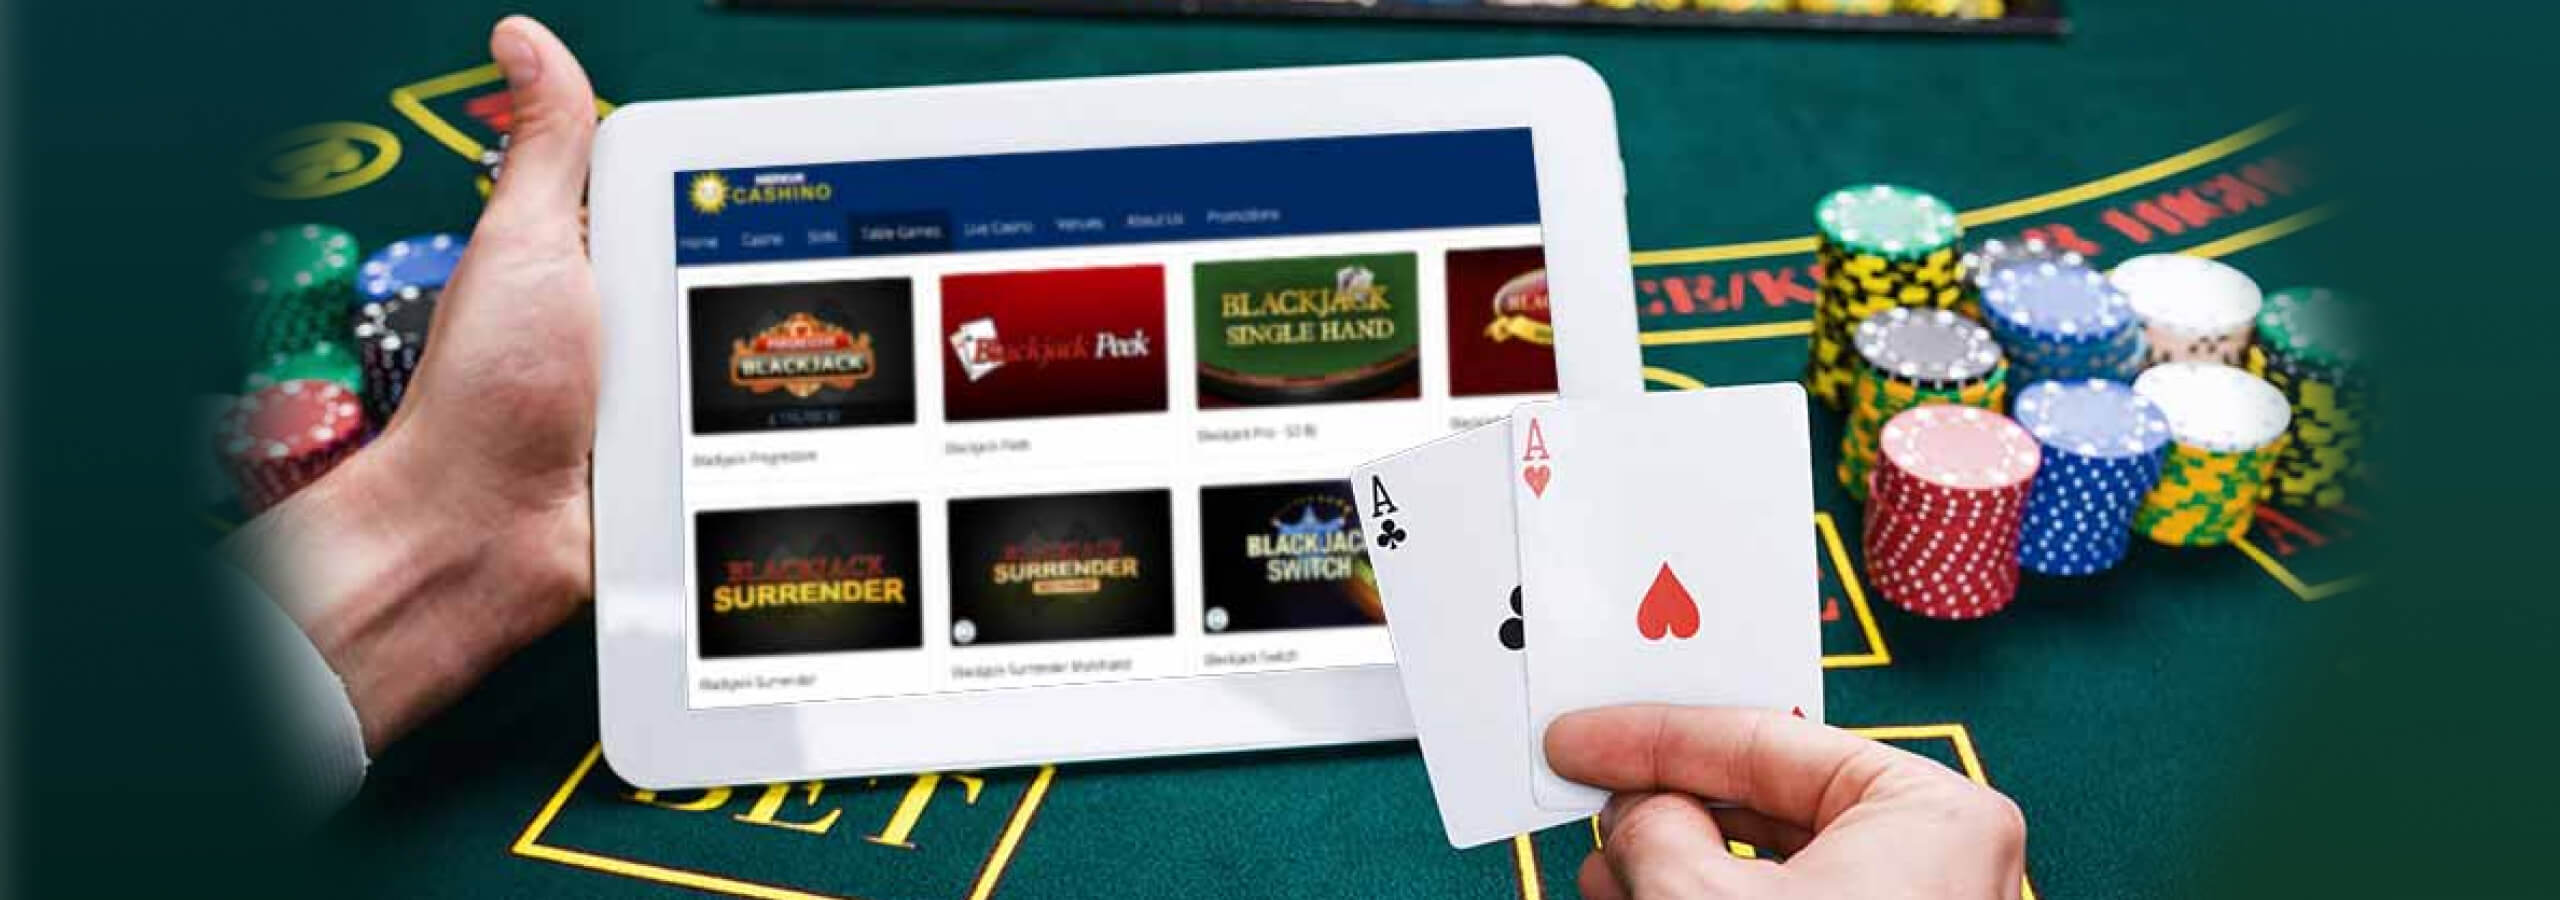 How to Play Blackjack Online?